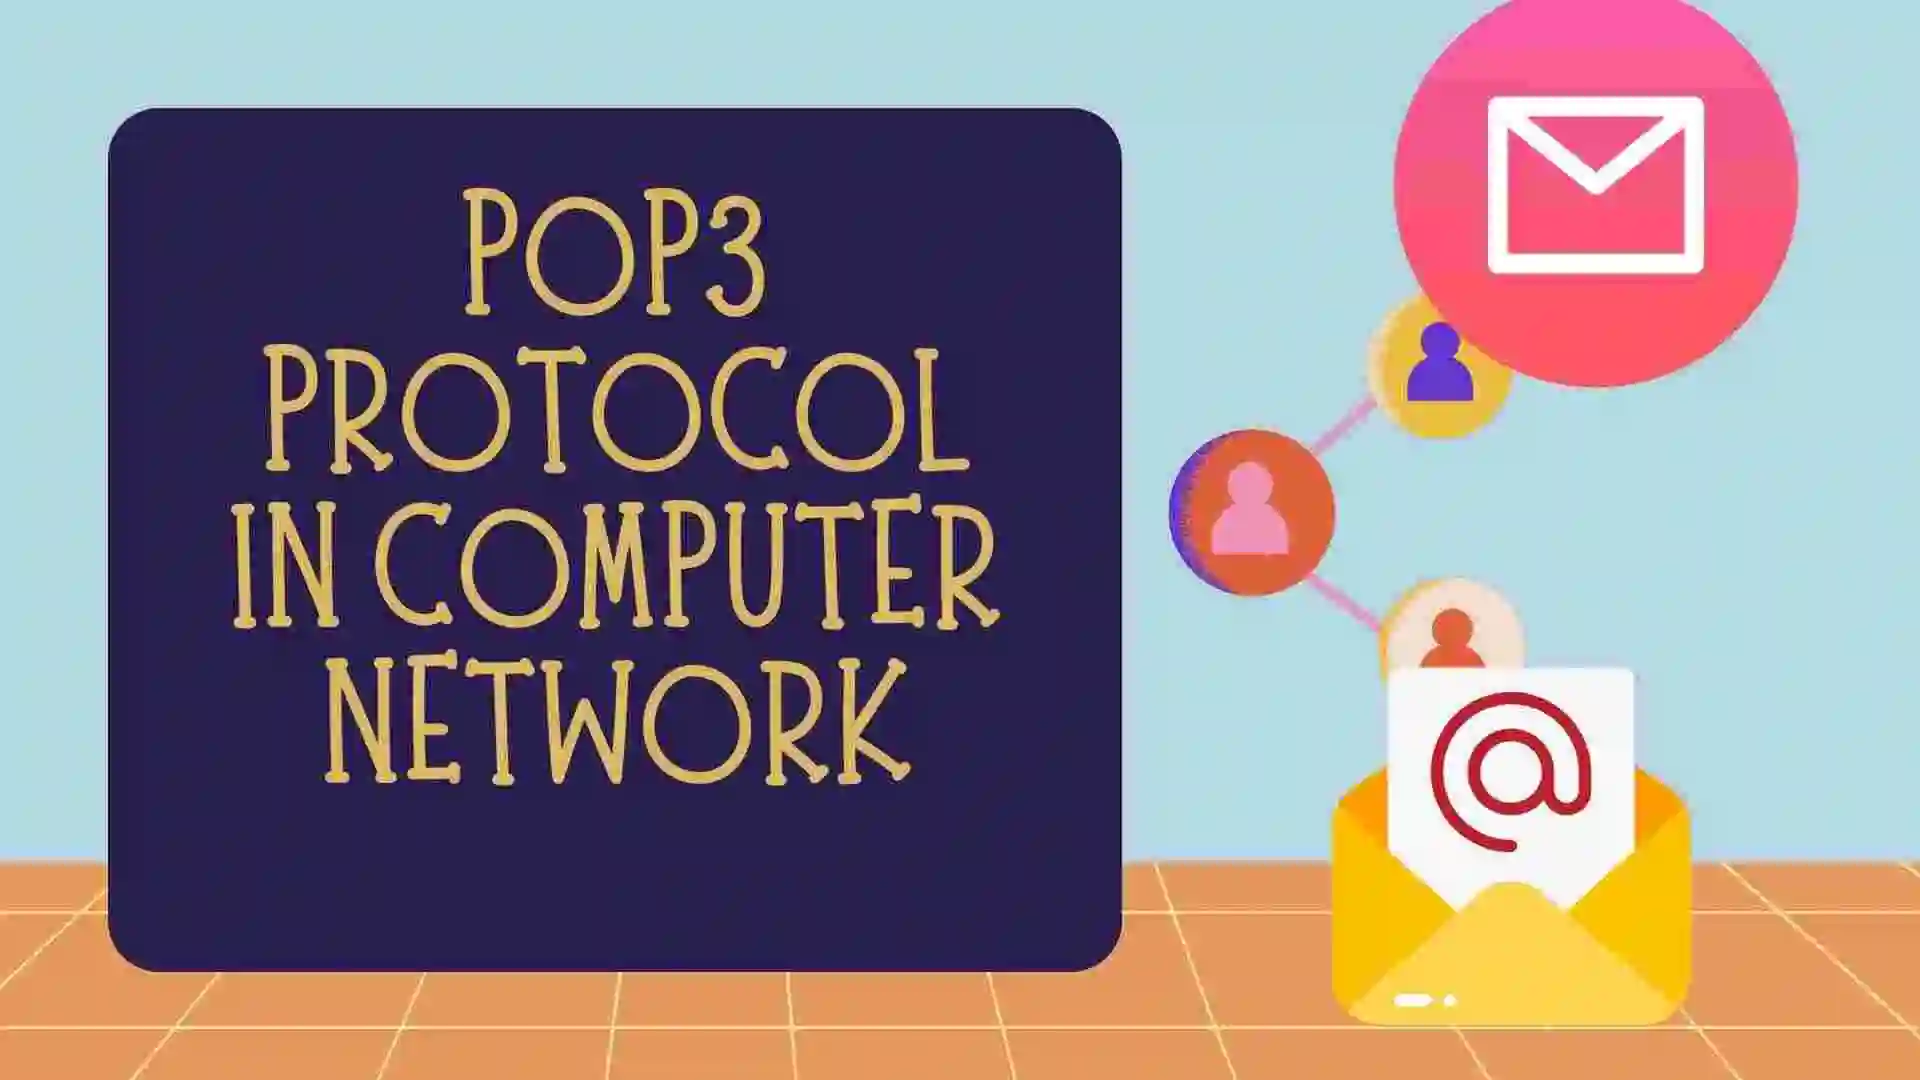 POP3 Protocol is a standard internet protocol used for retrieving email messages from a mail server to a local email client or application.